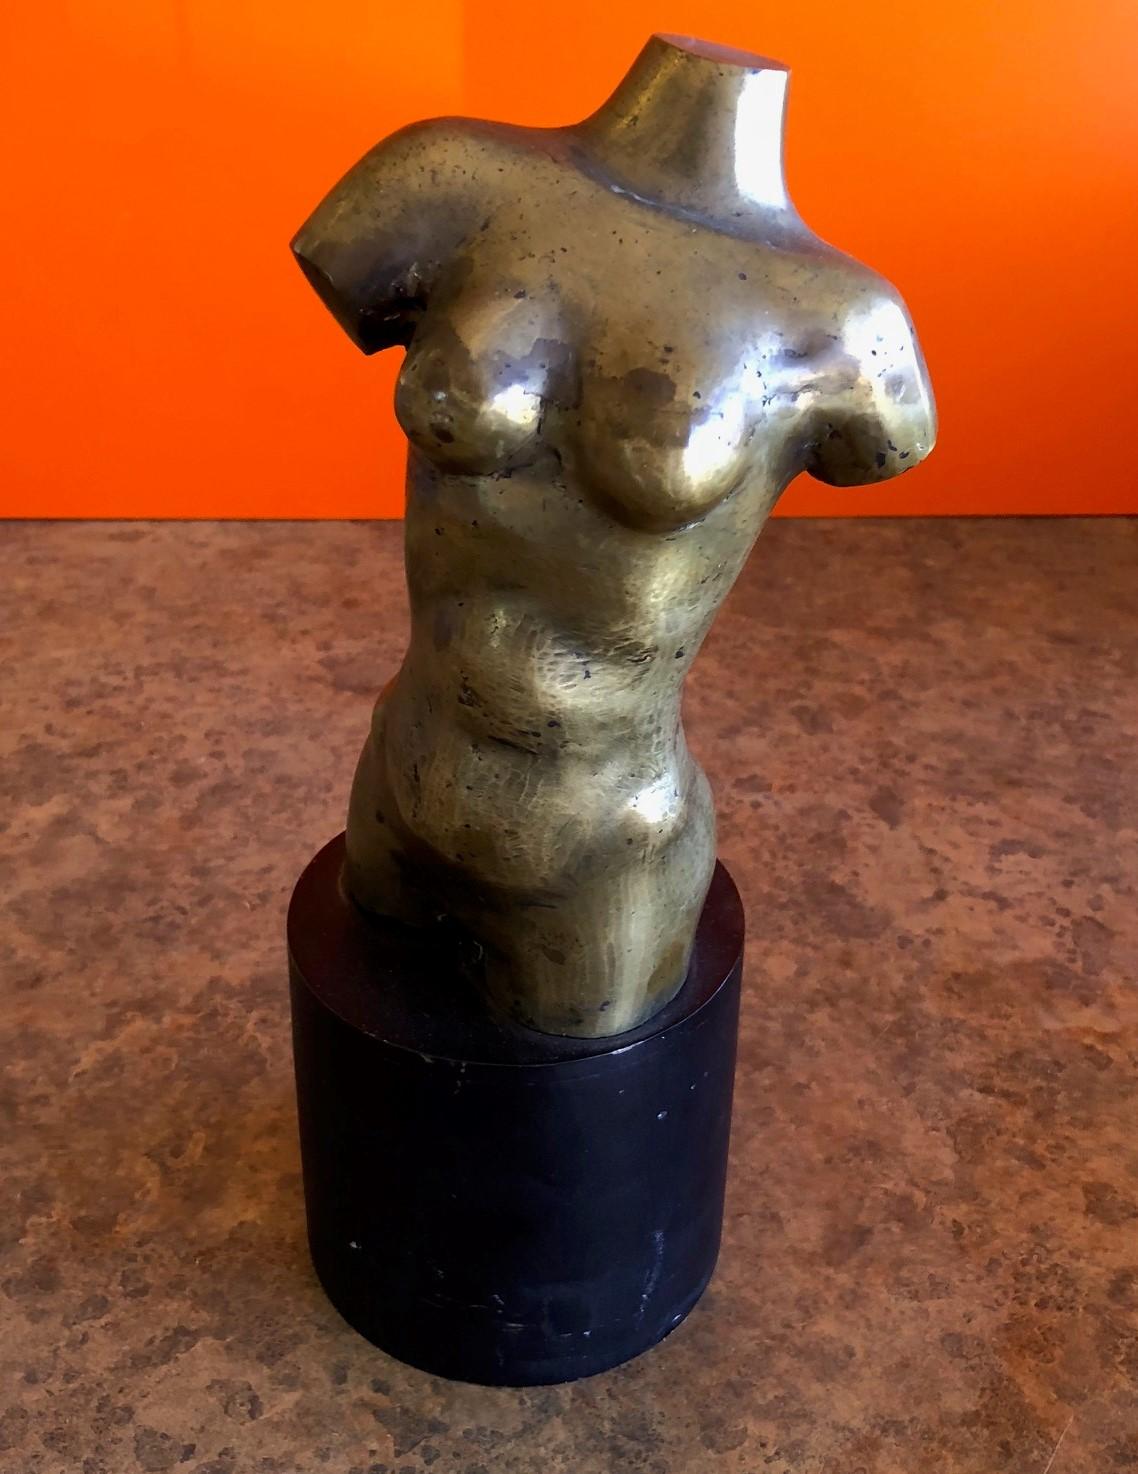 Midcentury abstract bronze nude on black metal base sculpture by Ken California listed artist Ken Vares, circa 1960s. The piece is very heavy, well detailed and signed.